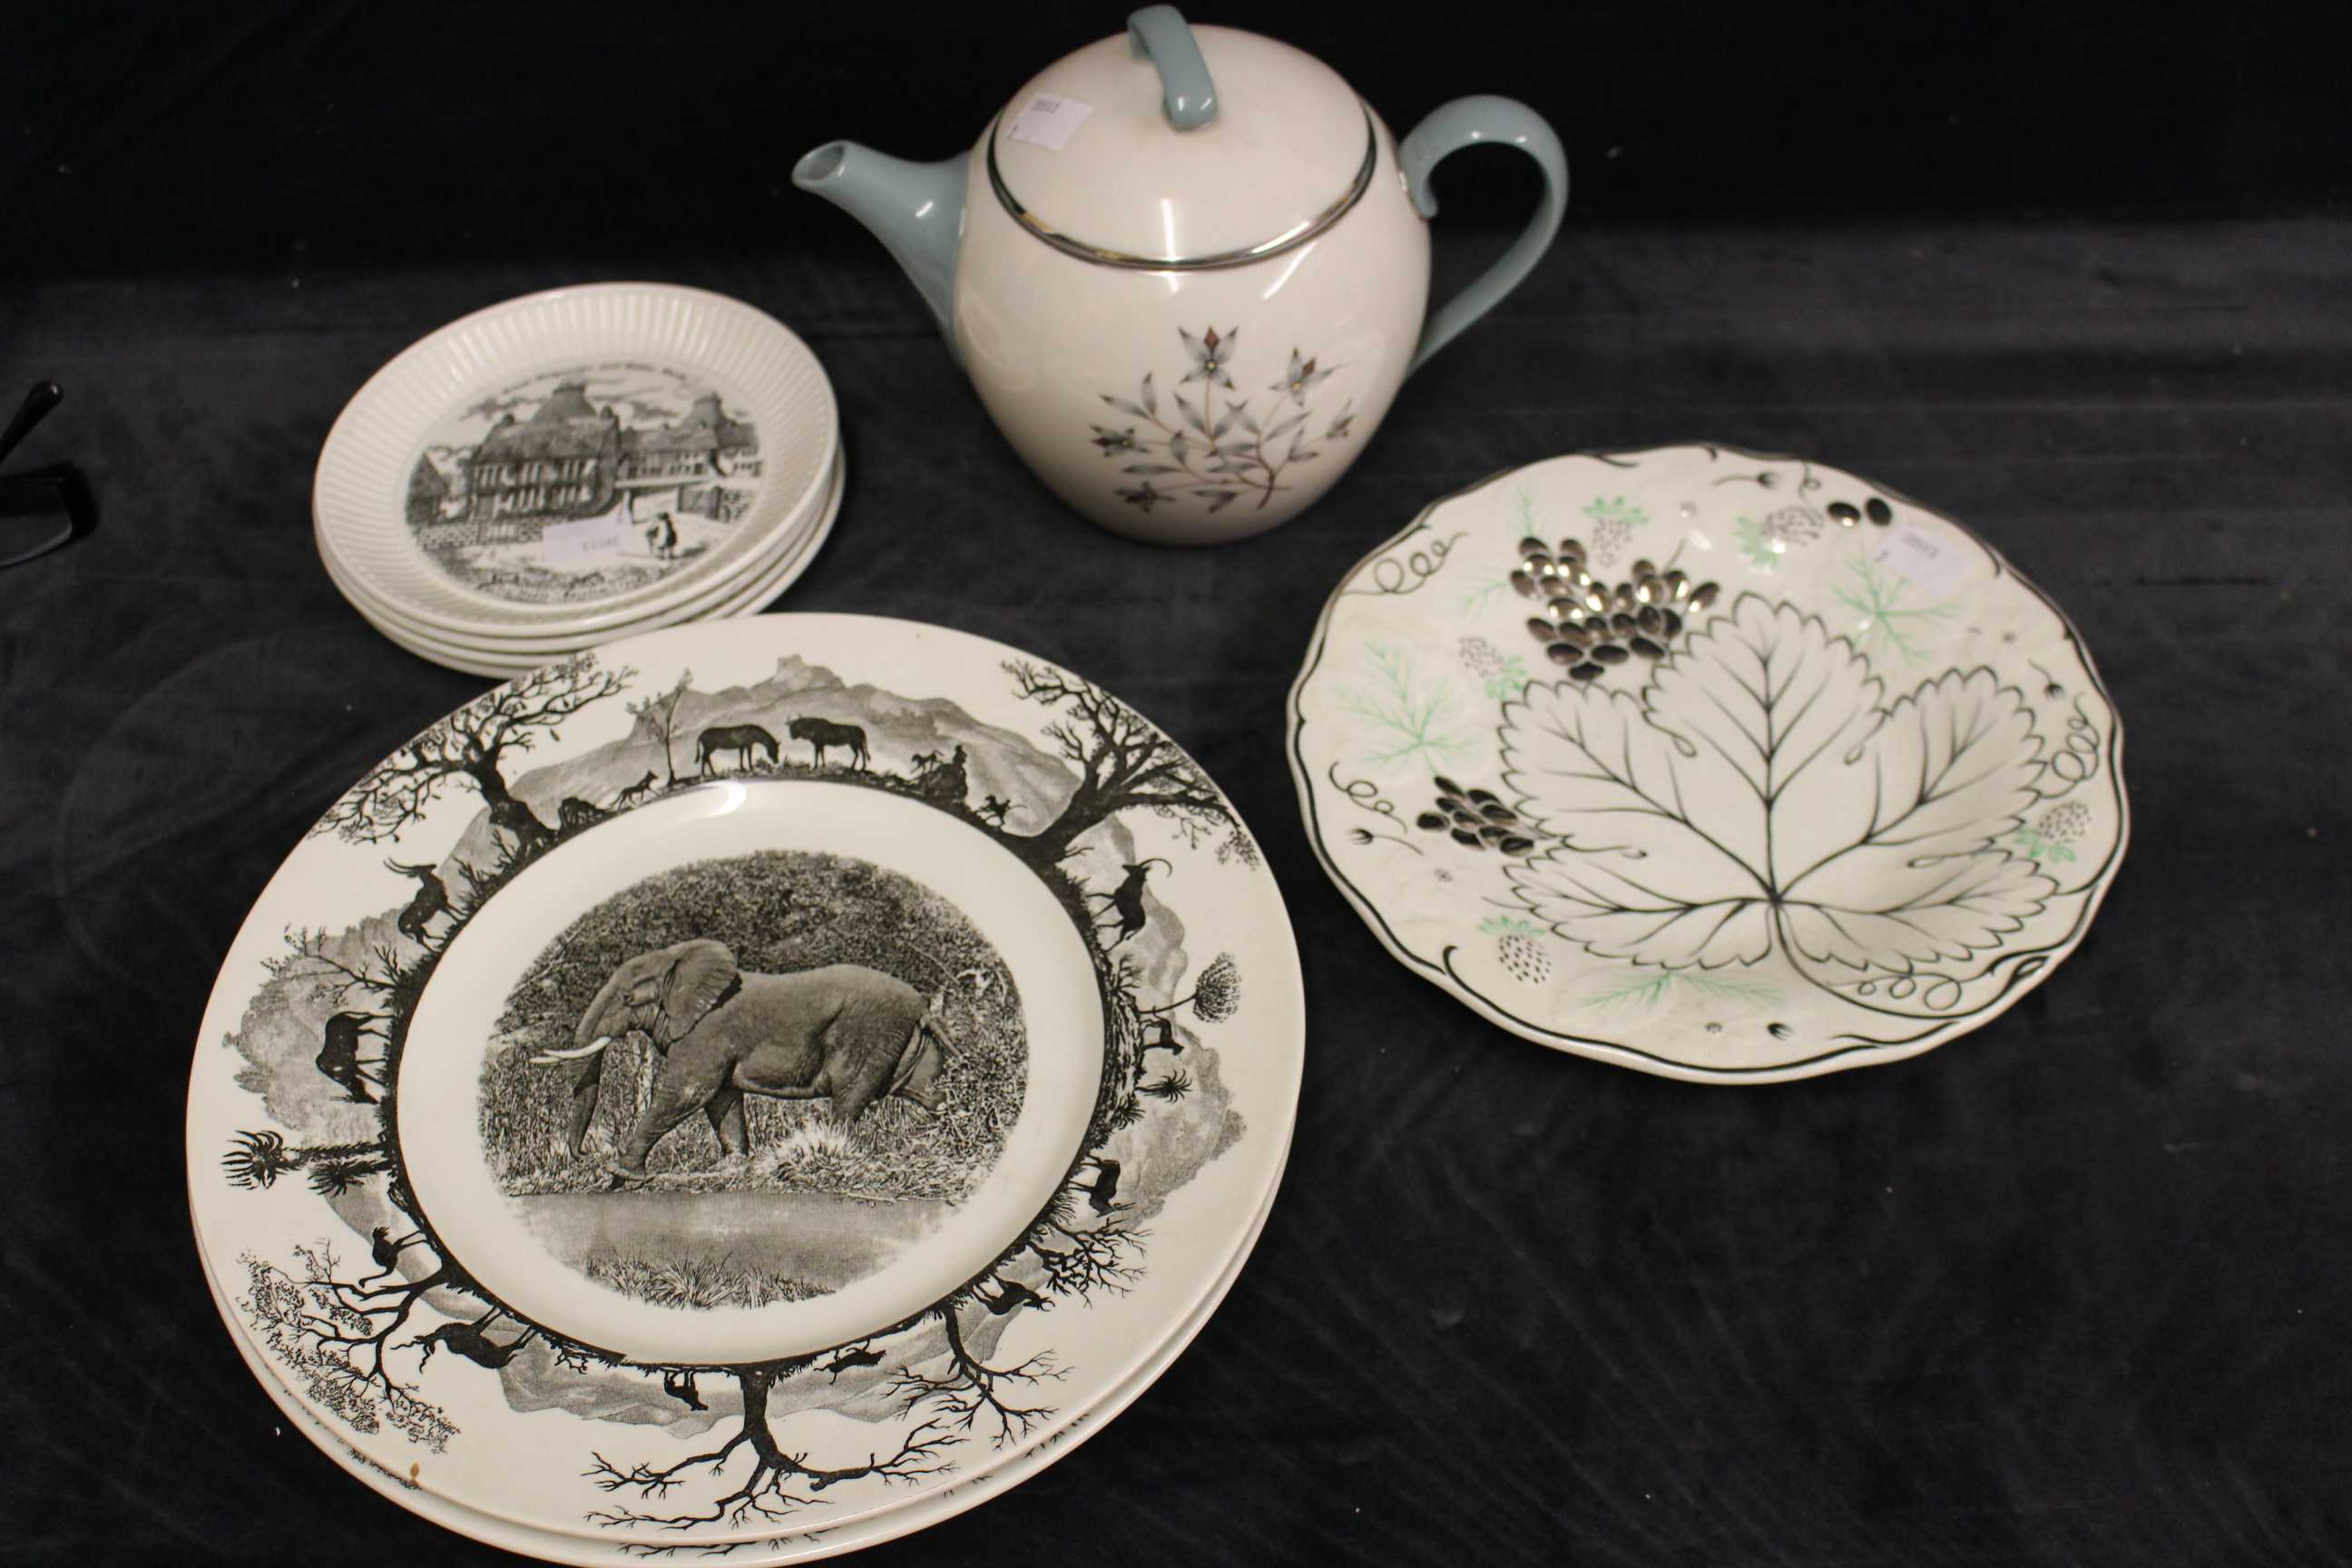 Three Wedgwood plates printed with wildlife, a Wedgwood silver lustre plate, teapot, set four - Image 4 of 4